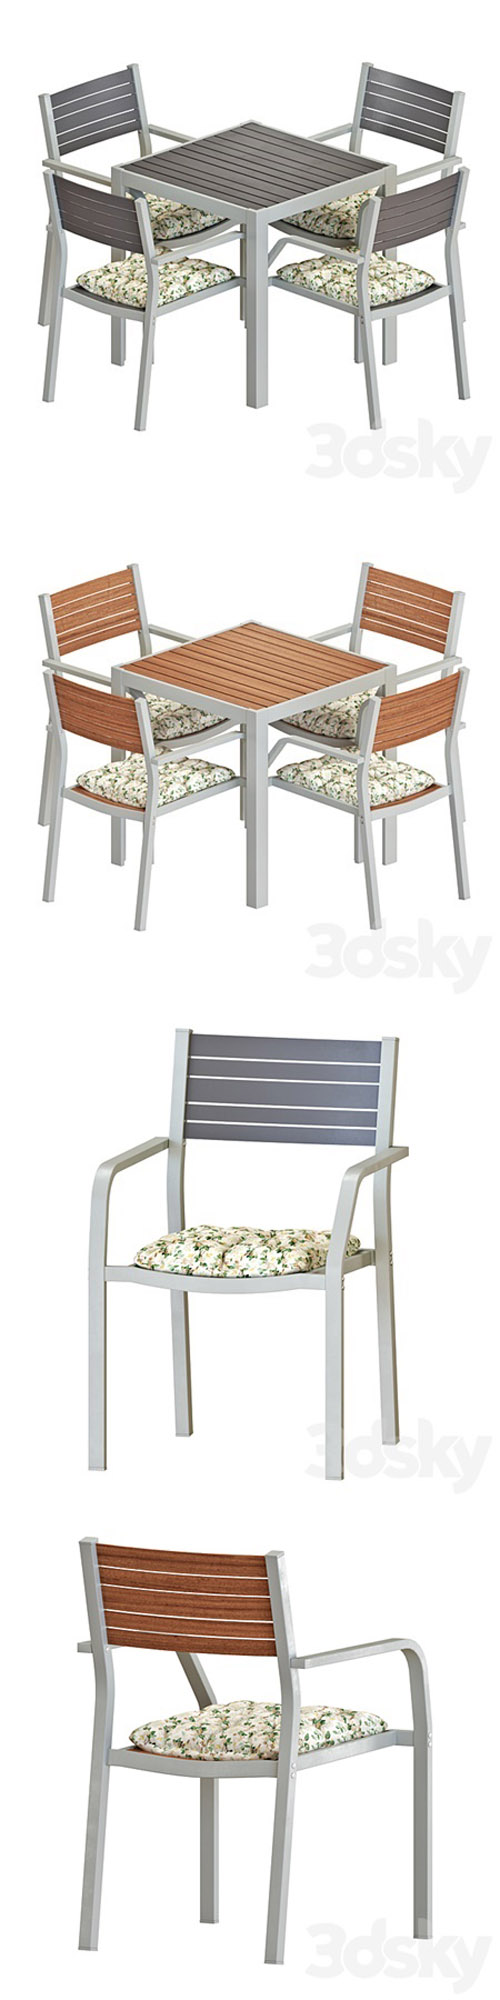 IKEA SJALLAND TABLE AND CHAIRS SET 02 3D Models